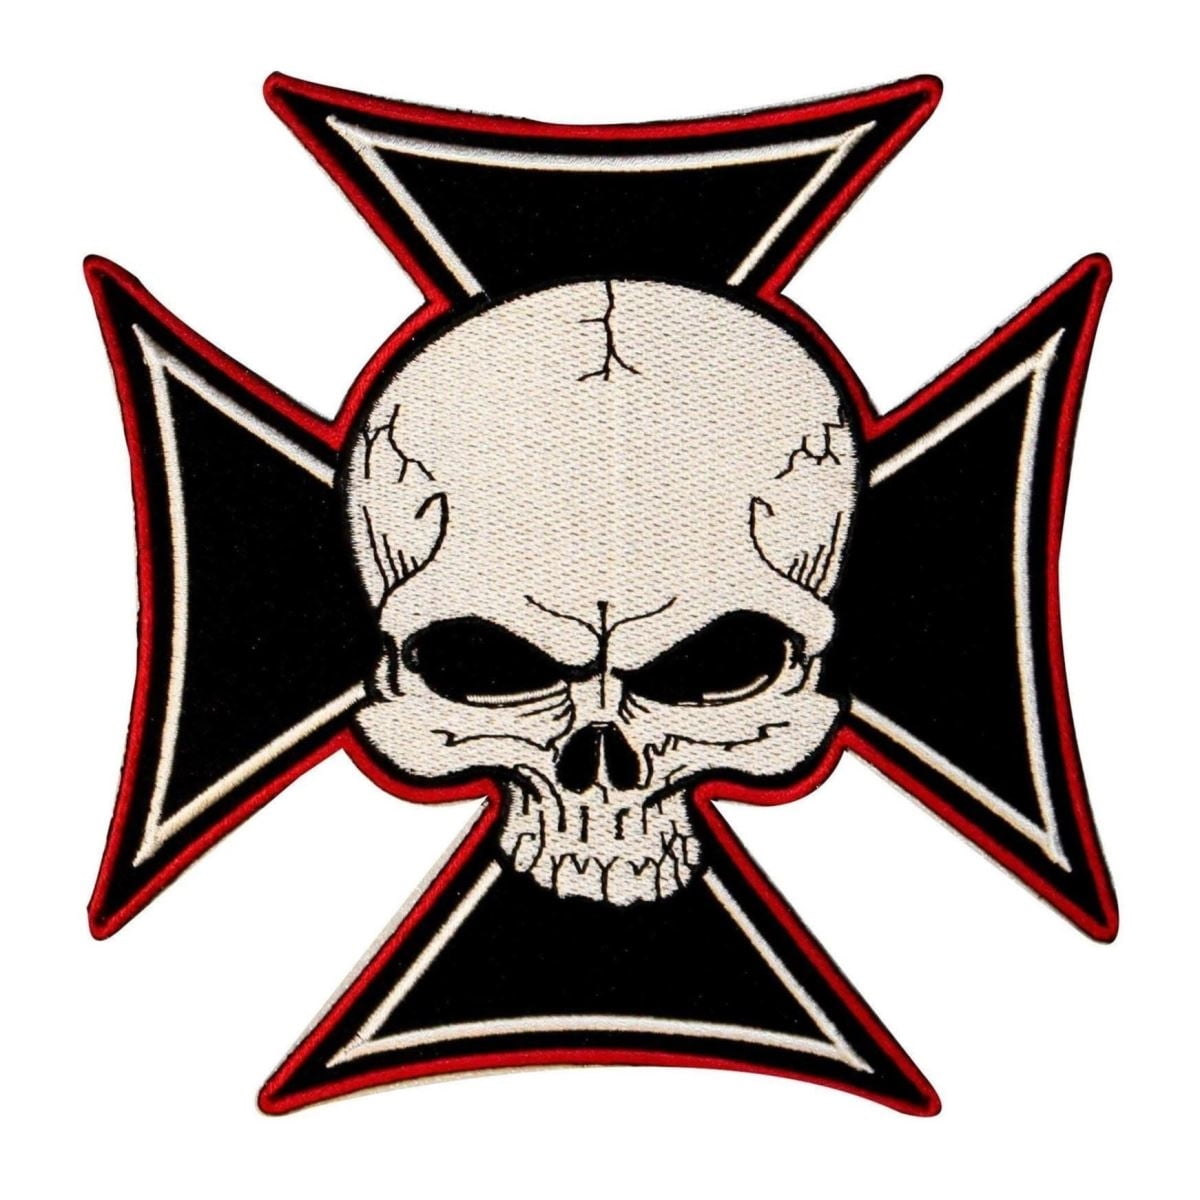 Red Fire Burn Iron Cross Motorcycles Embroidered Iron on Patch Free Shipping